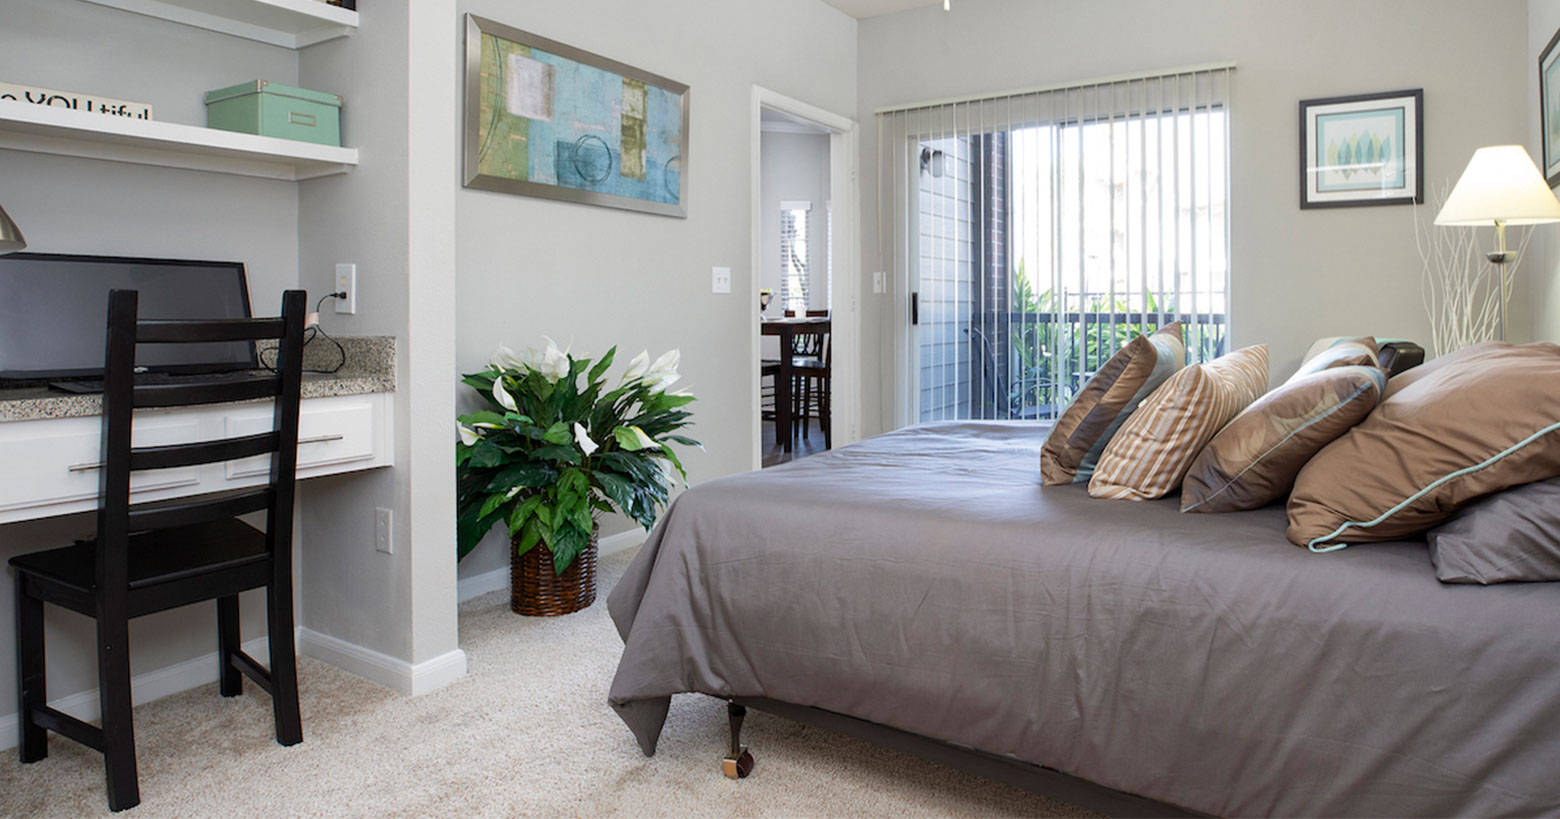 Our luxury apartments are a prime location for Houstonians